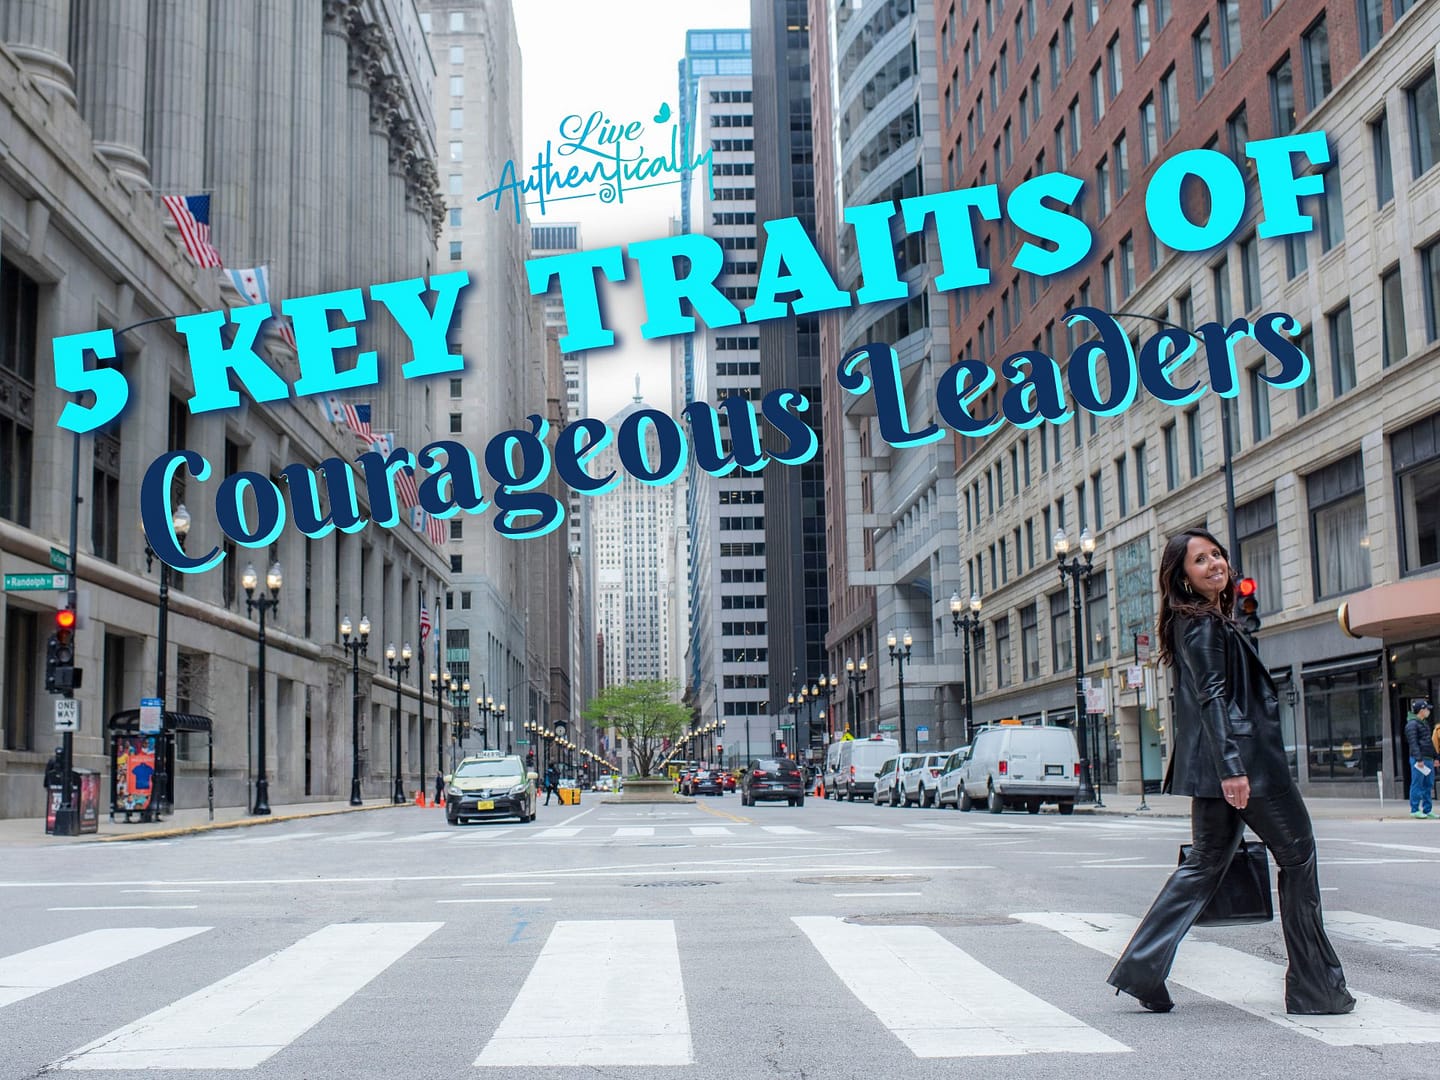 5 Key Traits of Courageous Leaders